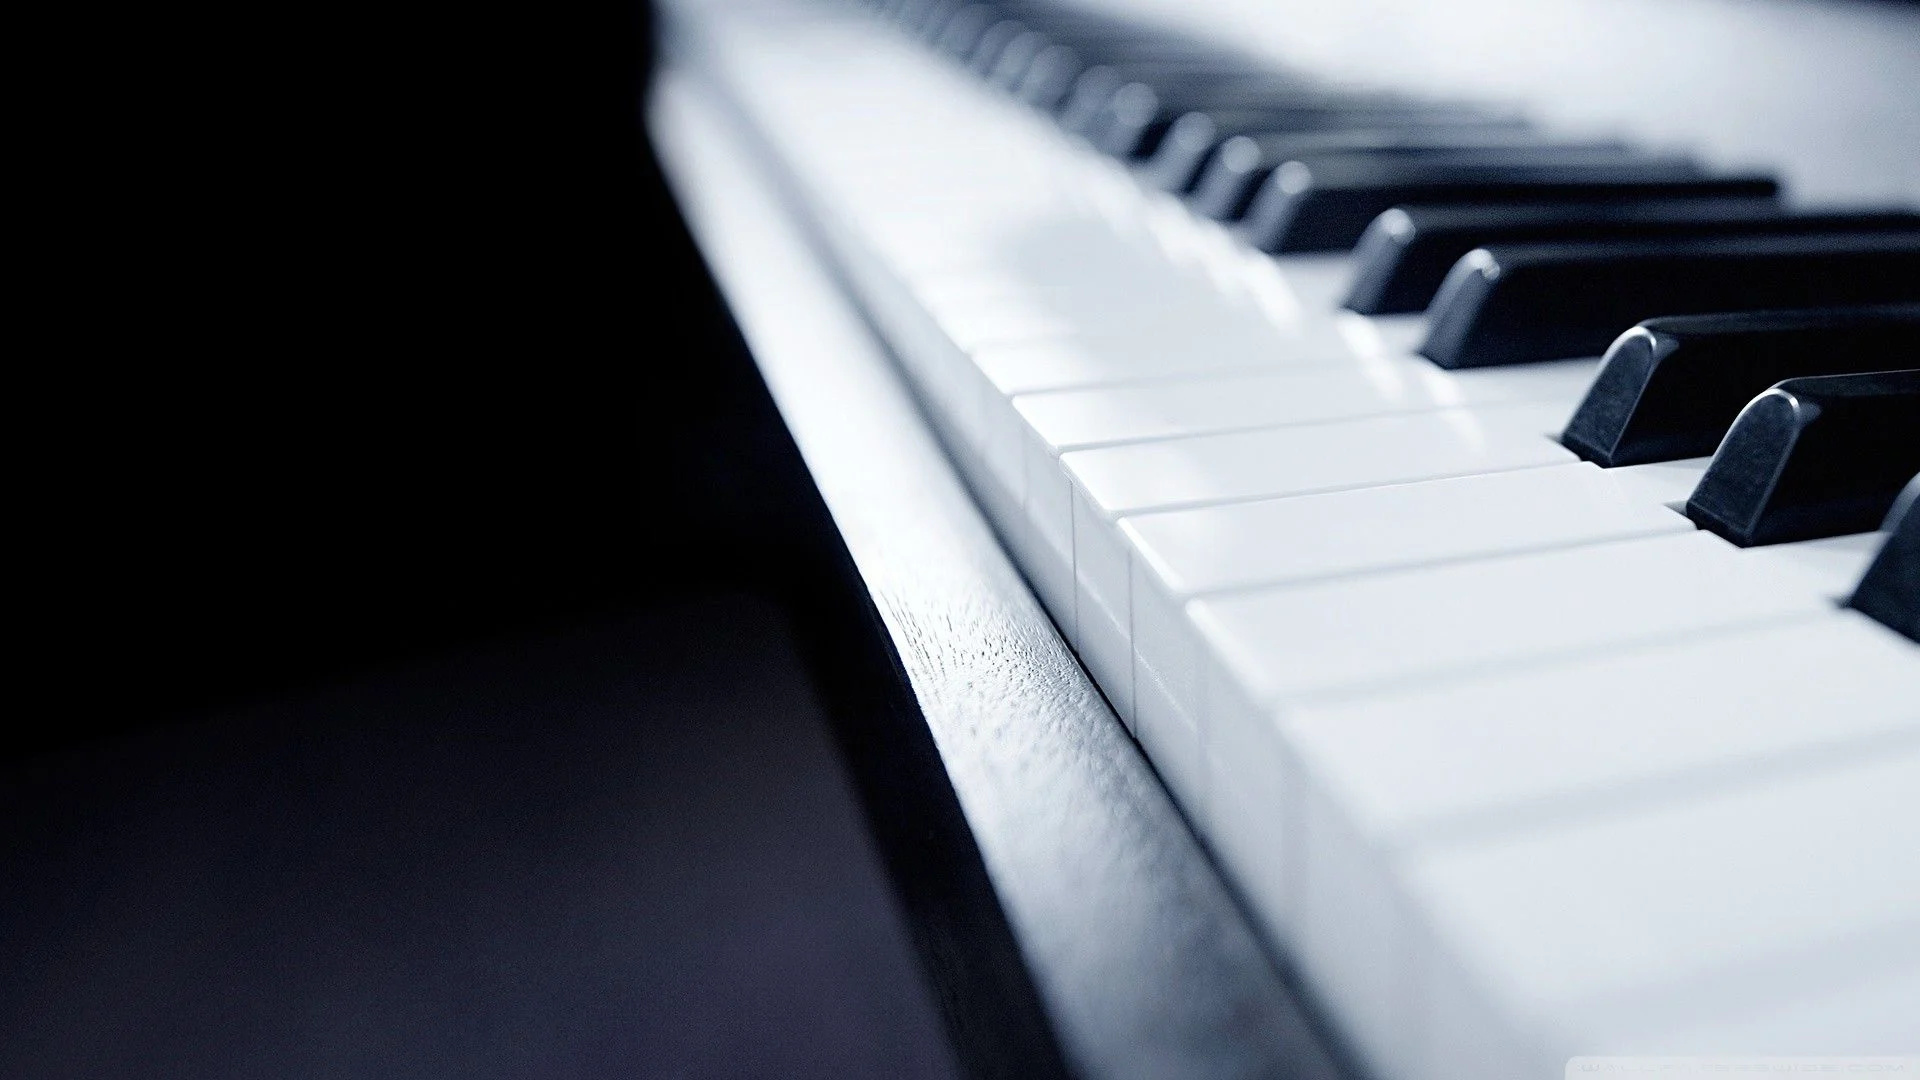 Piano: Smooth Row Of Keys, Lacquered Wood, Whalebones Were Used To Make Keys In The Past. 1920x1080 Full HD Wallpaper.